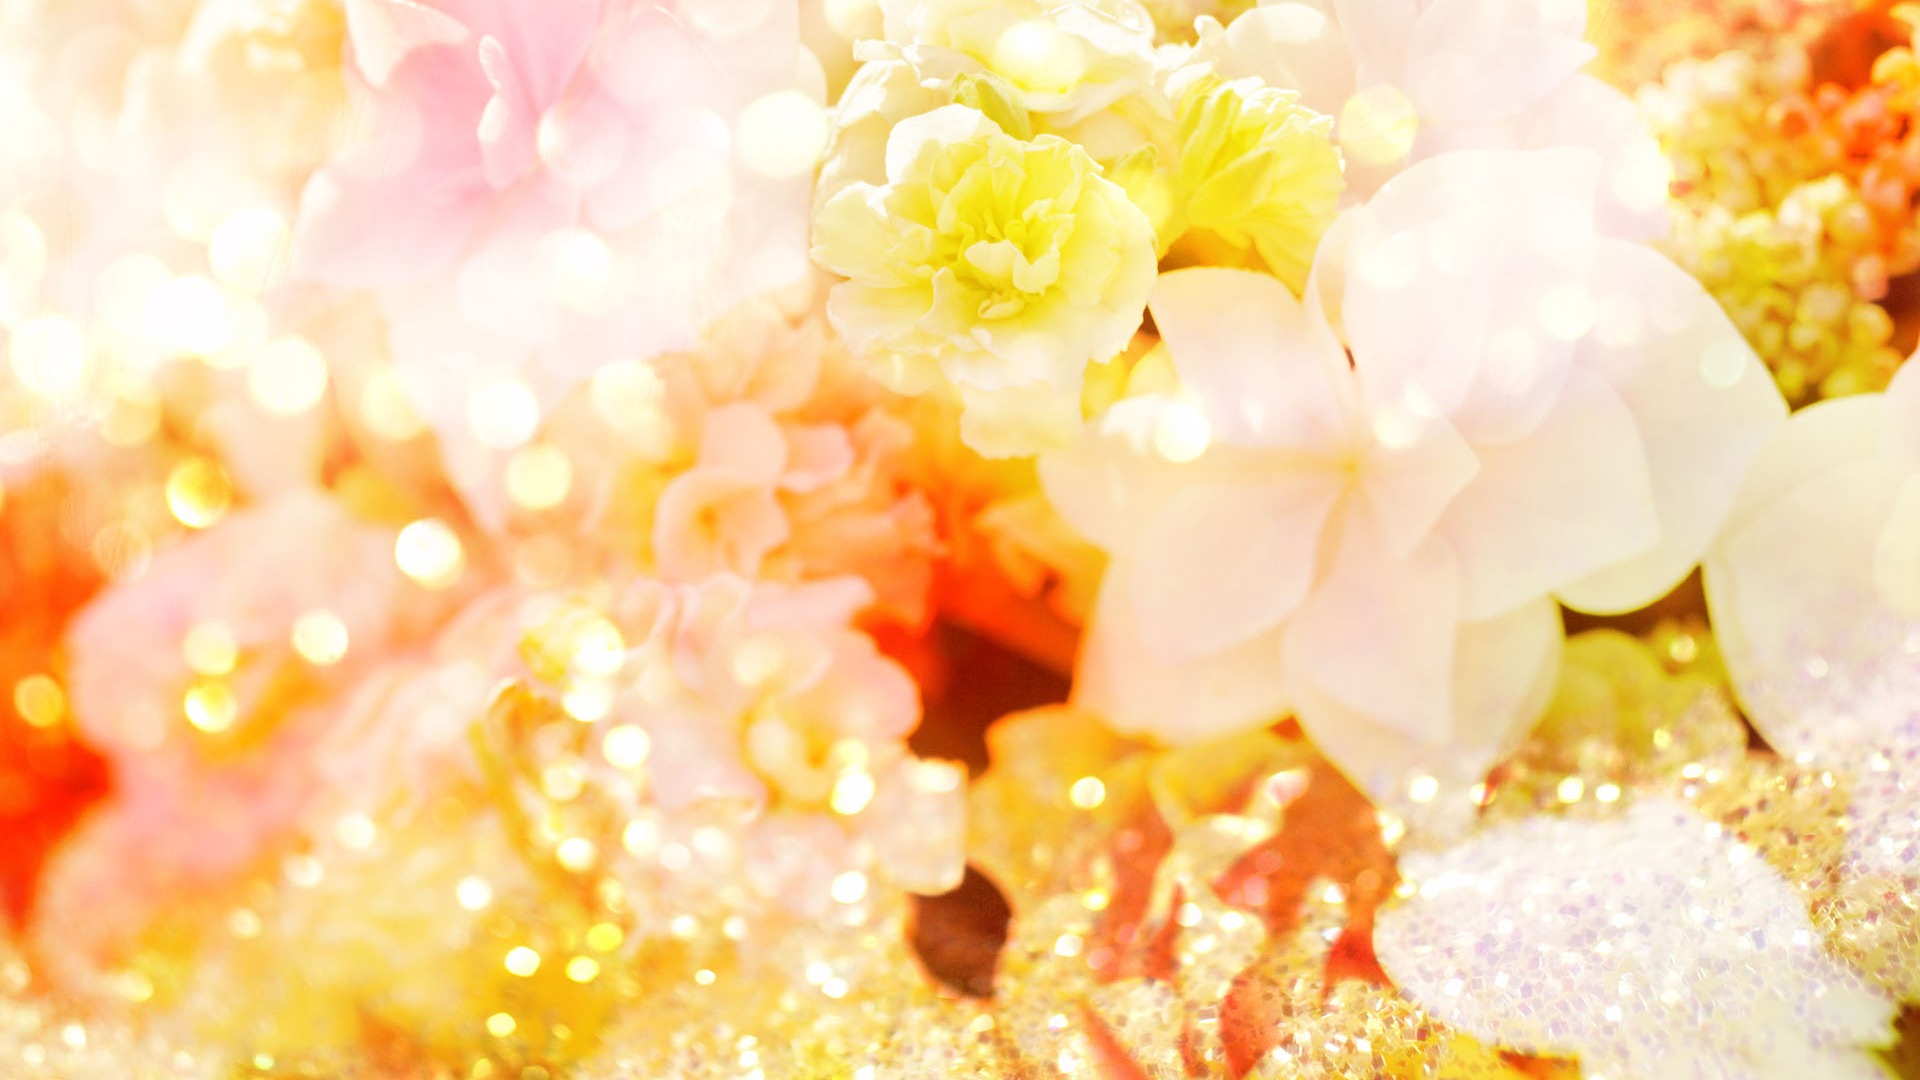 Aesthetic gift decorative HD Wallpapers #11 - 1920x1080